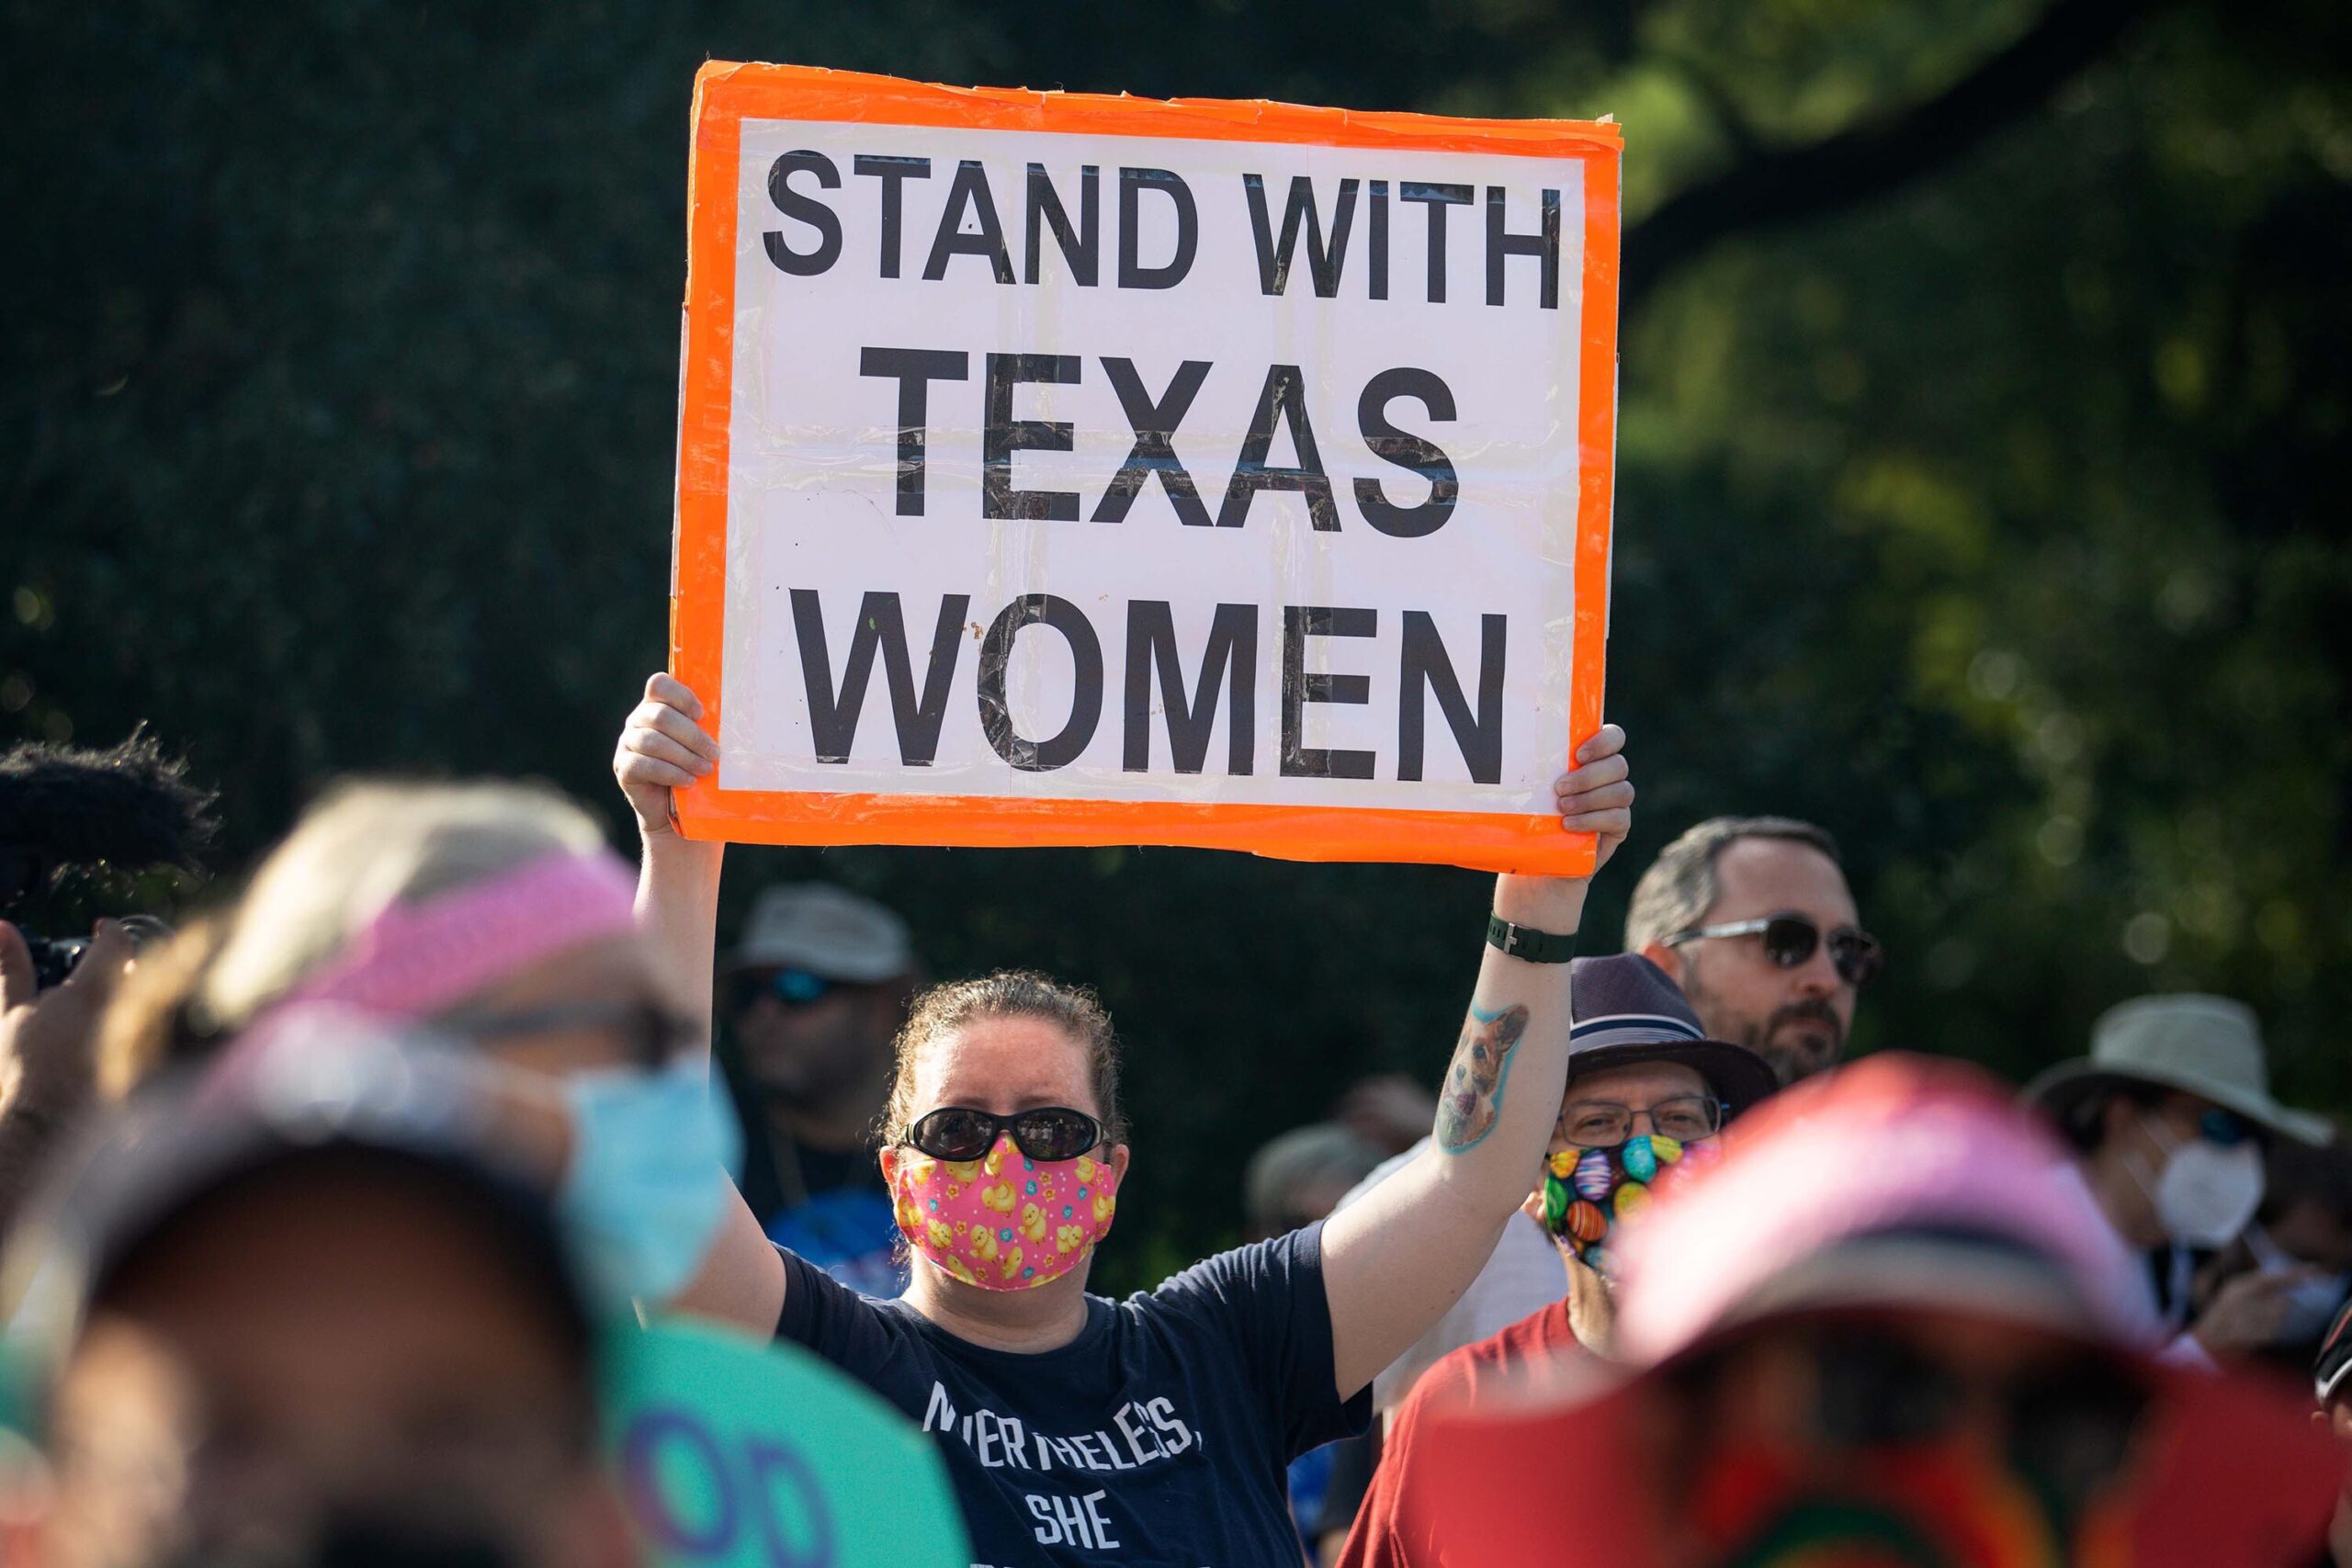 Texas Attorney General Ken Paxton asked the 5th US Circuit Court of Appeals on Friday to restore Texas' six-week abortion ban while a federal judge's ruling blocking the new law is appealed.